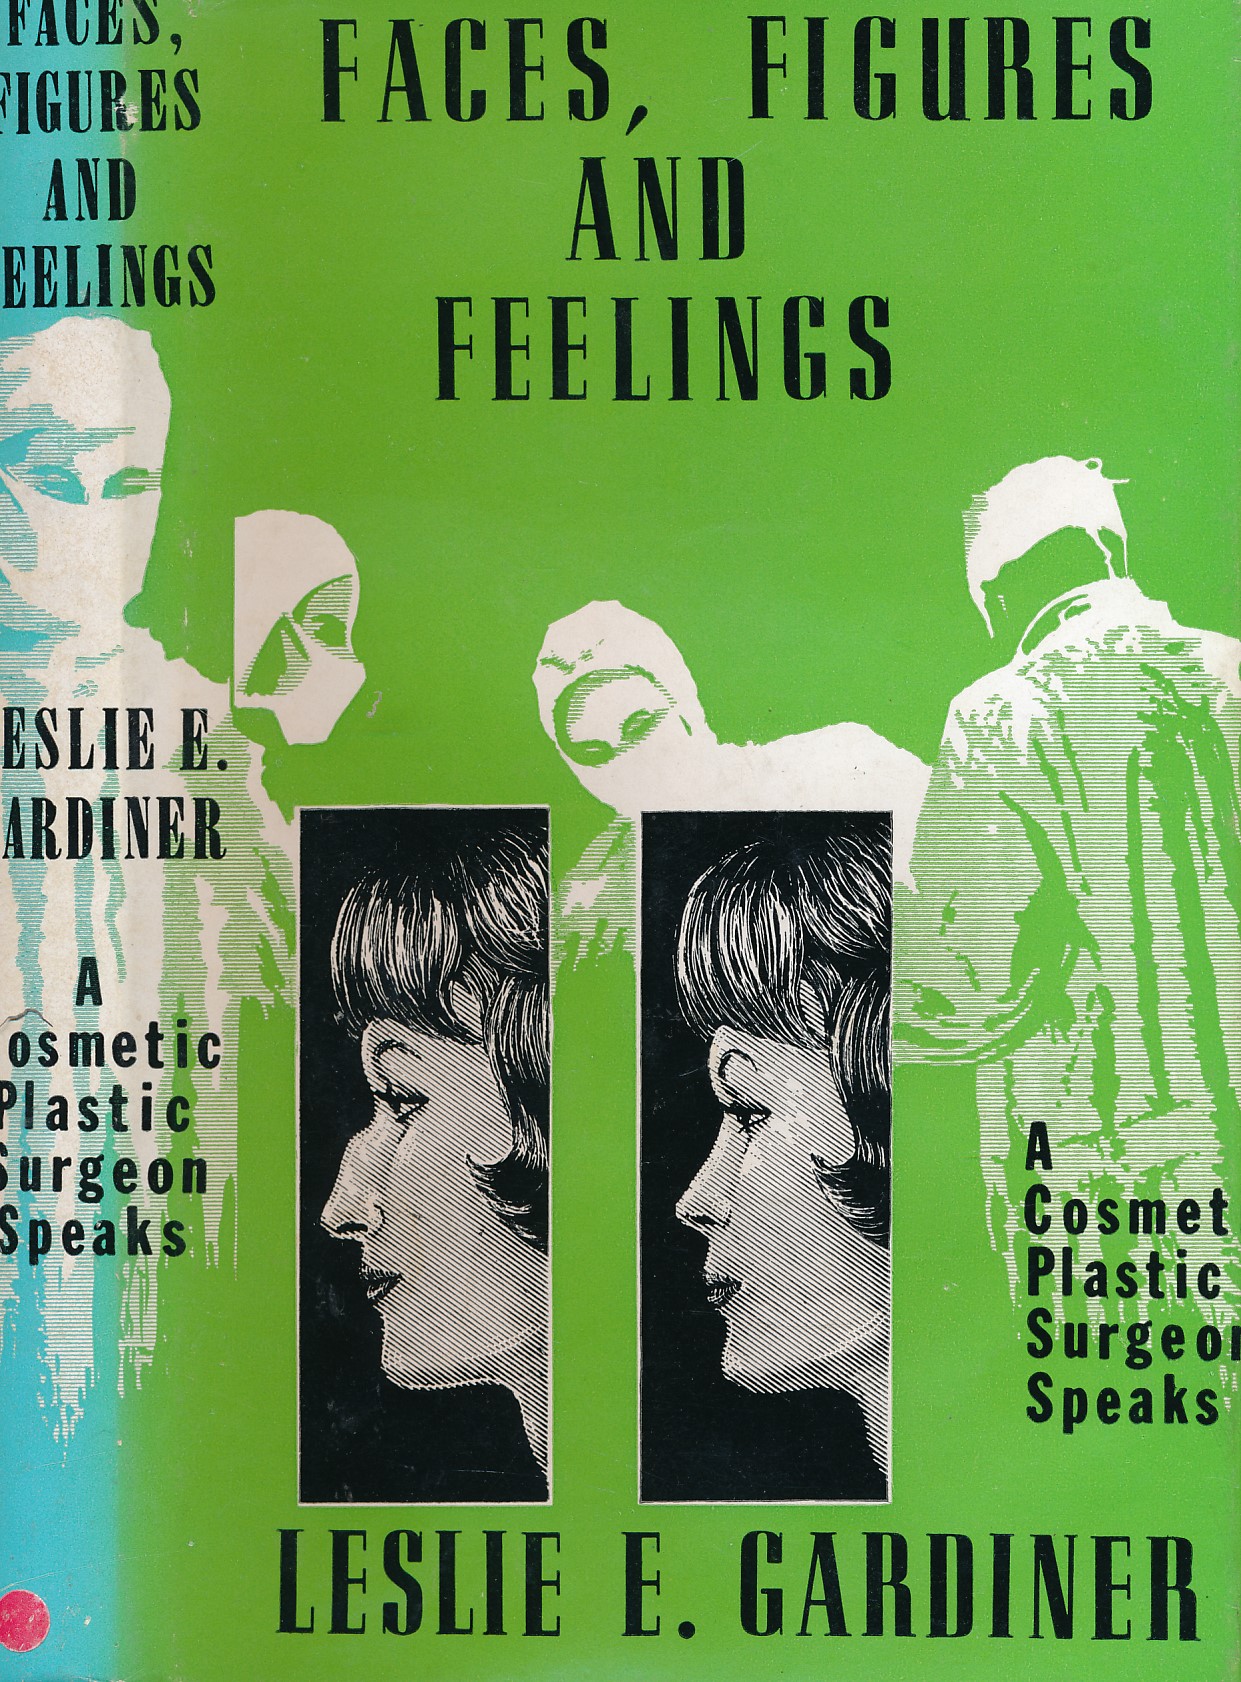 Faces, Figures and Feelings. A Cosmetic Plastic Surgeon Speaks. Signed copy.